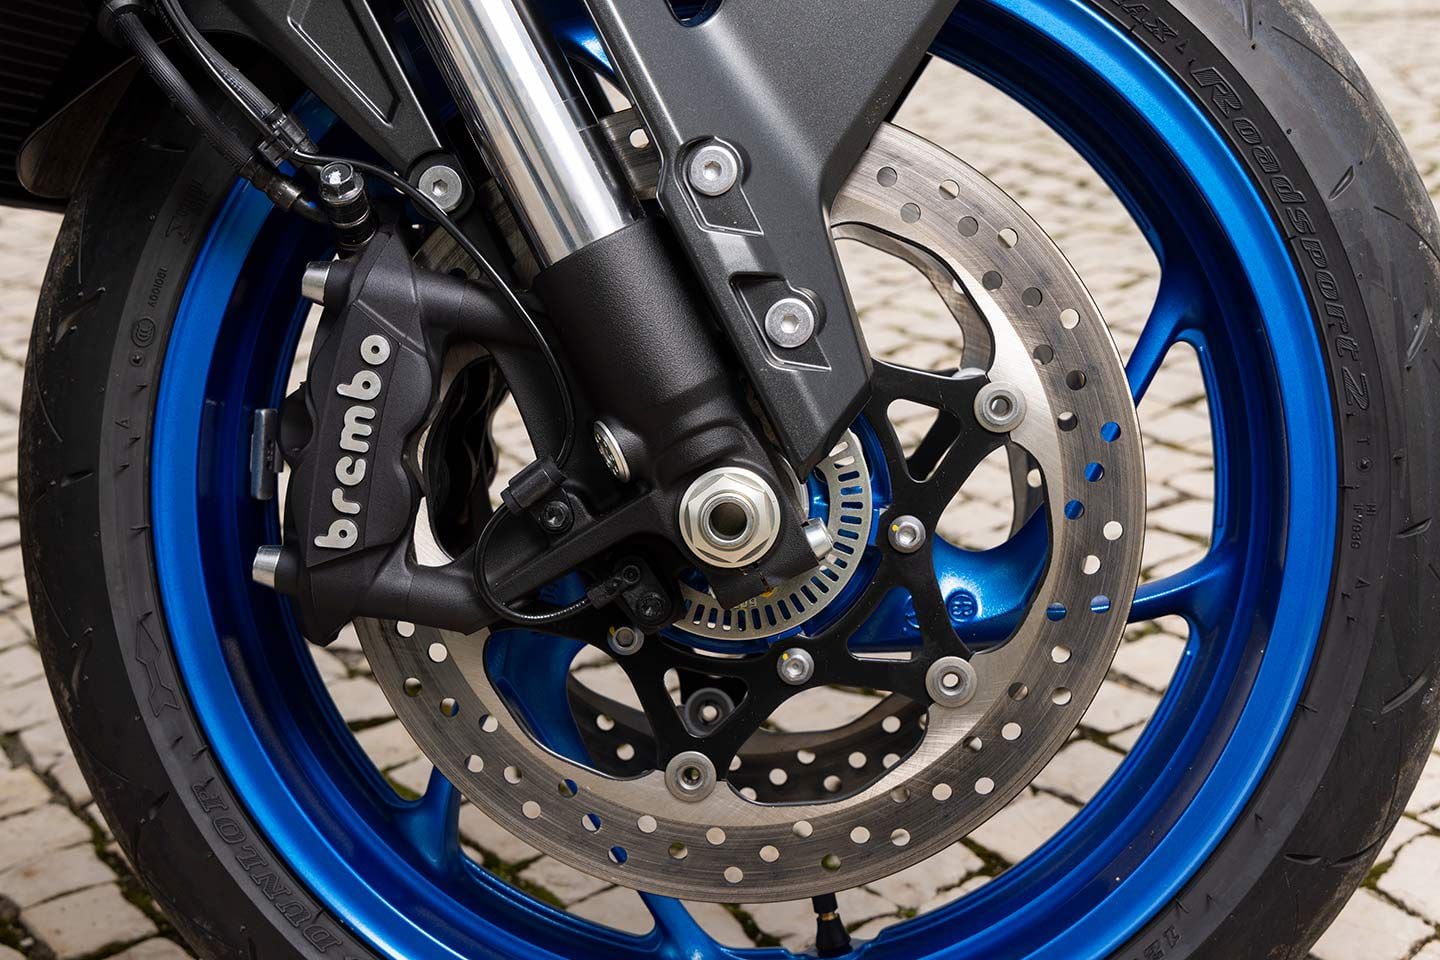 Front brakes lack initial bite and power through the pull, which leaves something to be desired on a bike that’s as capable as the GSX-S1000GX+.